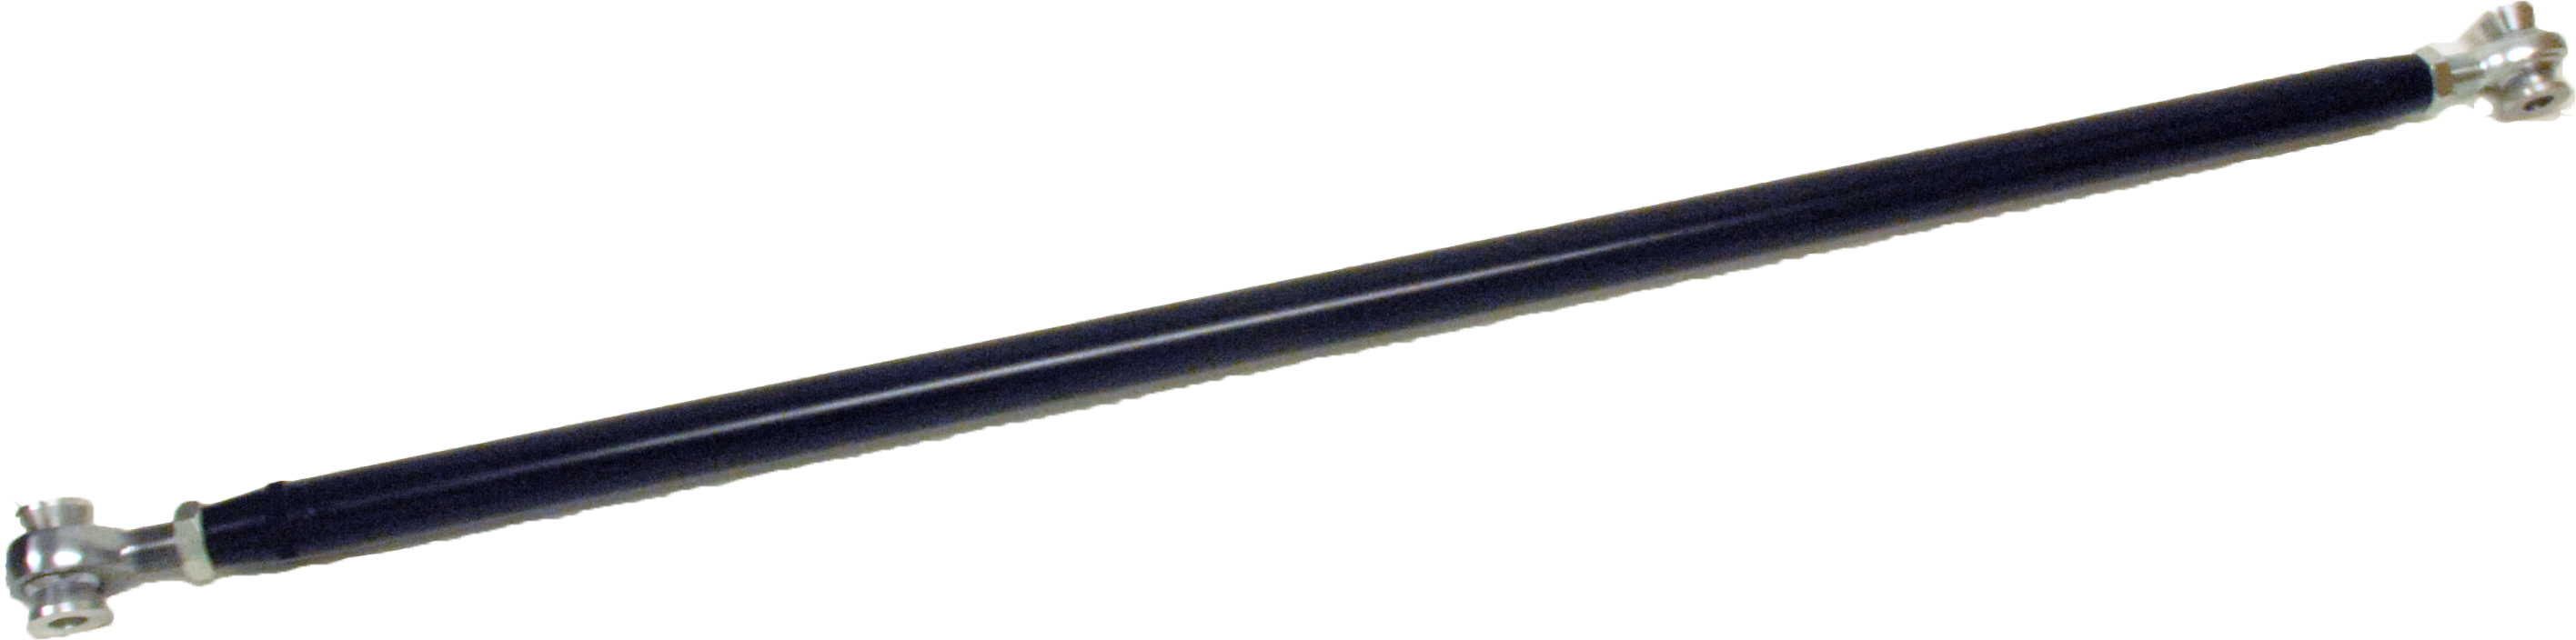 Part # 737101 - Moser Adjustable Panhard Rod (1982-2002 F-Bodies only)